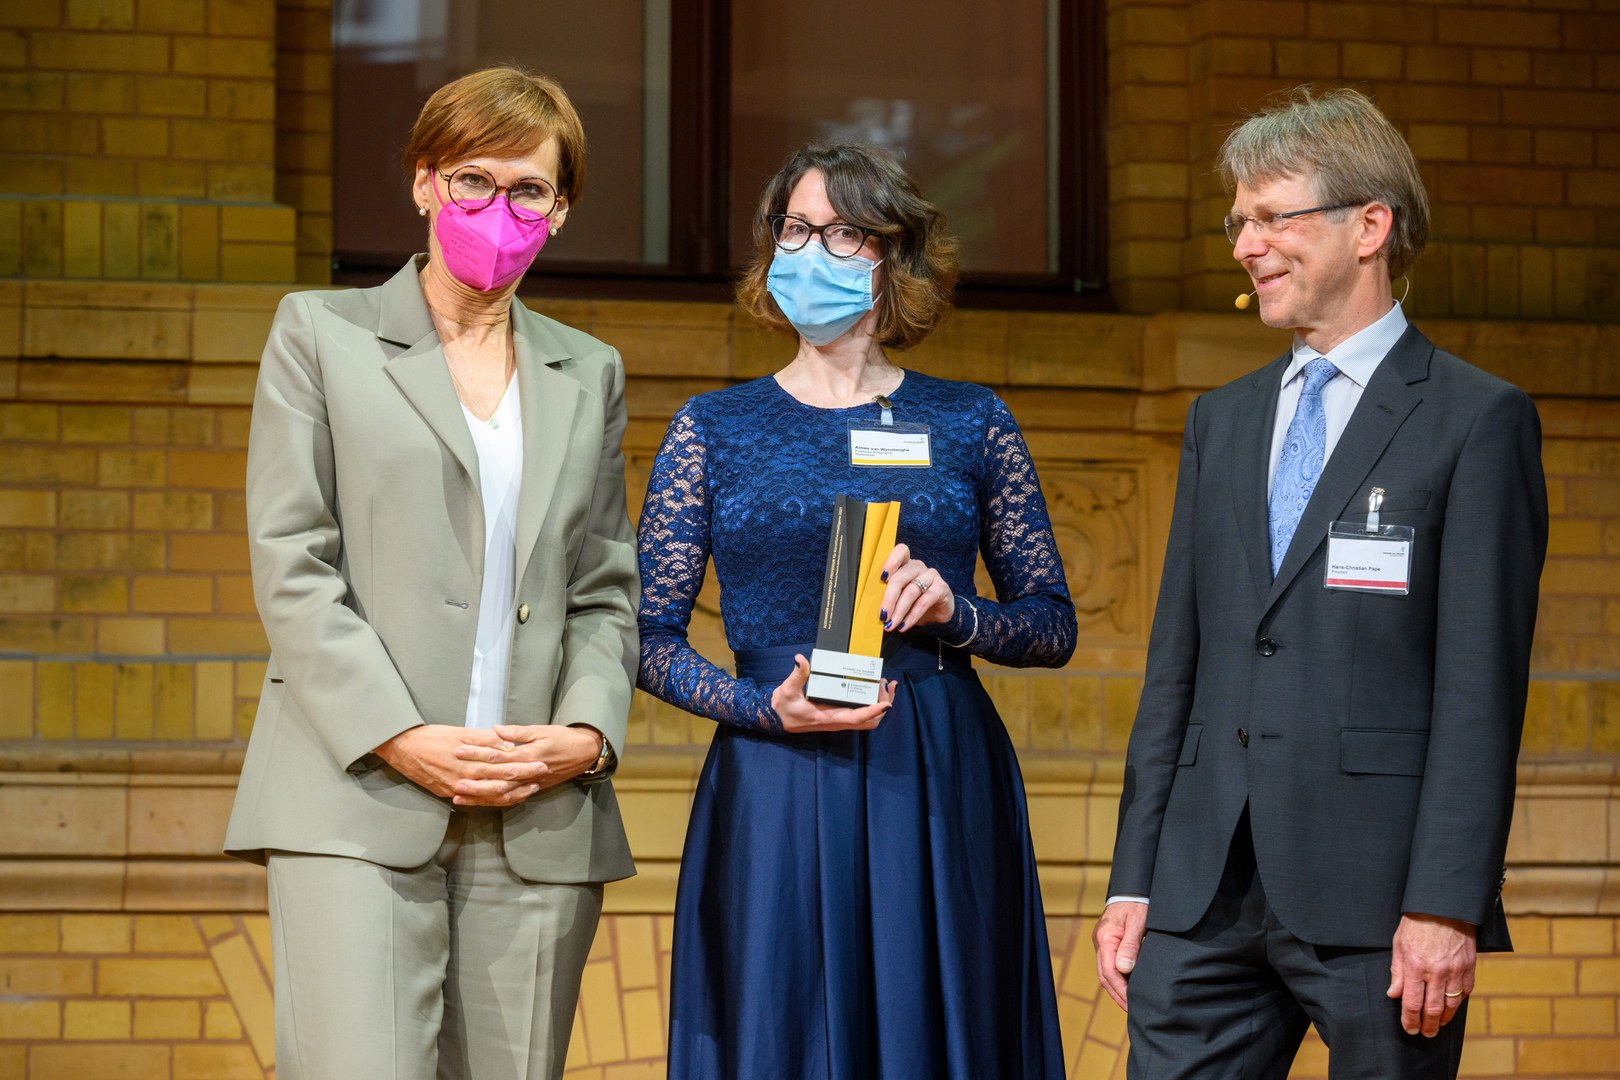 Humboldt Professor Aimee van Wynsberghe (center) with Bettina Stark-Watzinger, Federal Minister of Education and Research, and Hans-Christian Pape, President of the Humboldt Foundation.